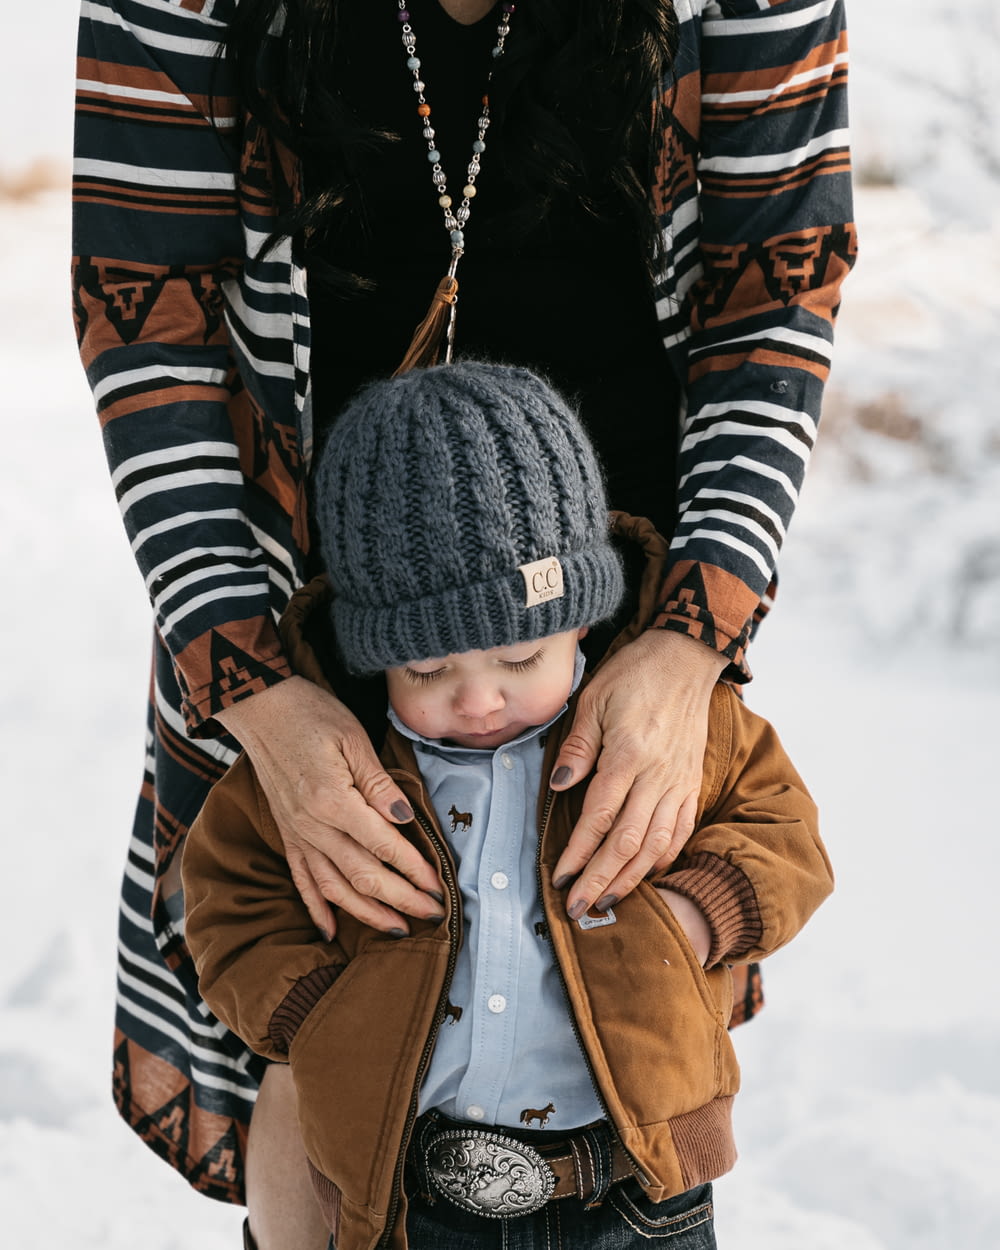 a woman holding a small child in the snow